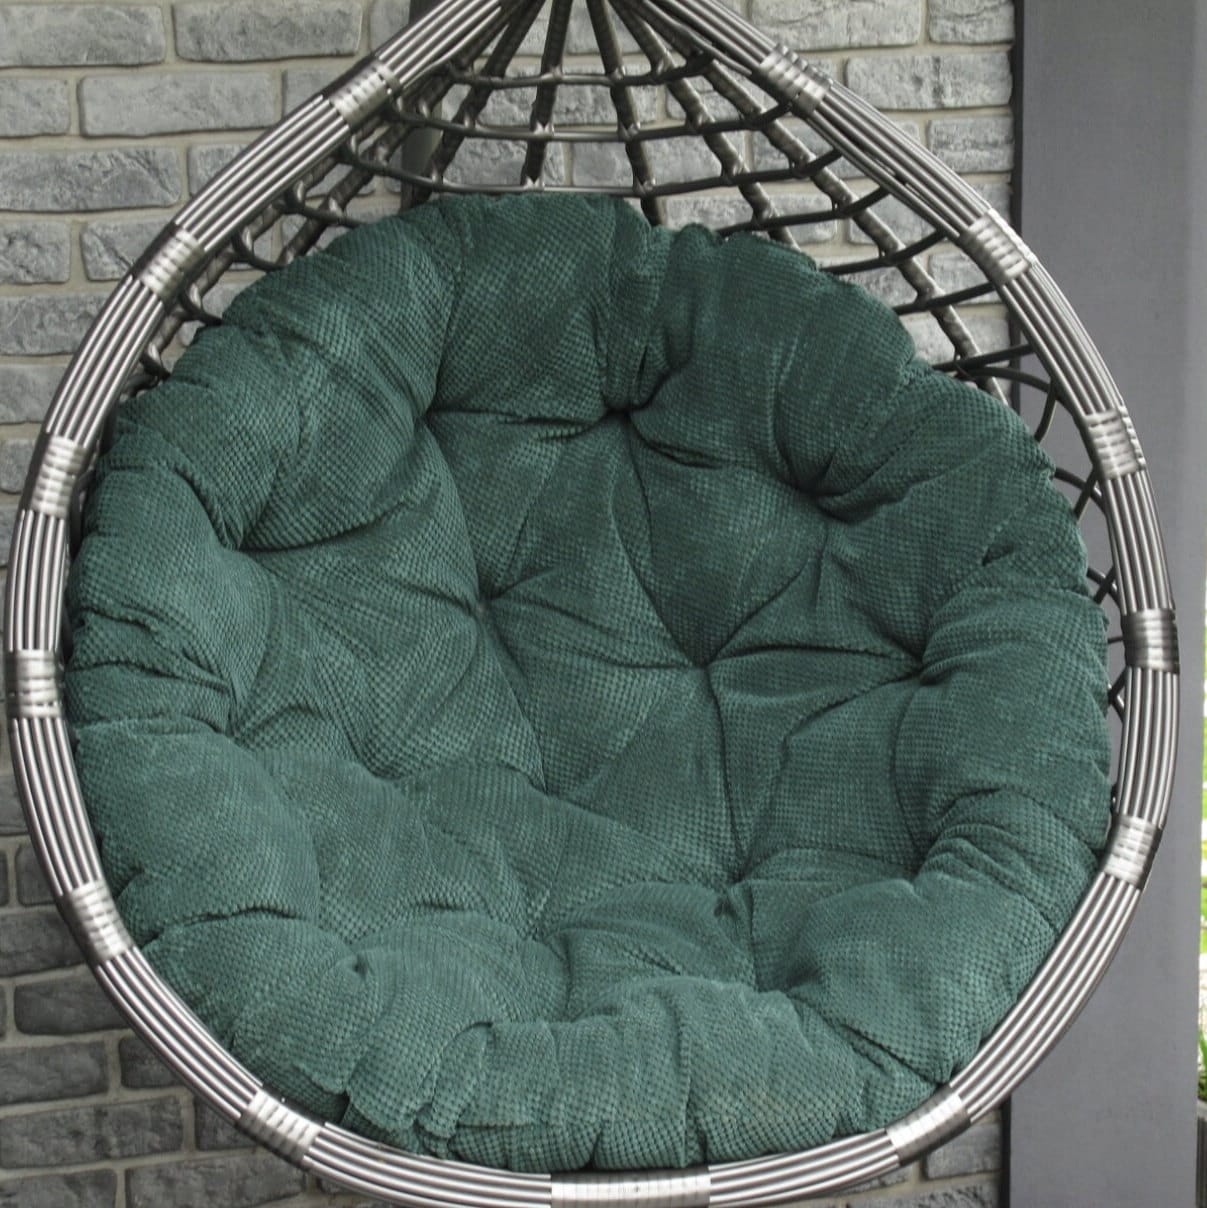 Cushion for Hammock chair | Egg Chair Pillow | Round Pillow for Hanging egg chair | CUSHION ONLY | Outdoor Indoor Porch Patio swing pillow